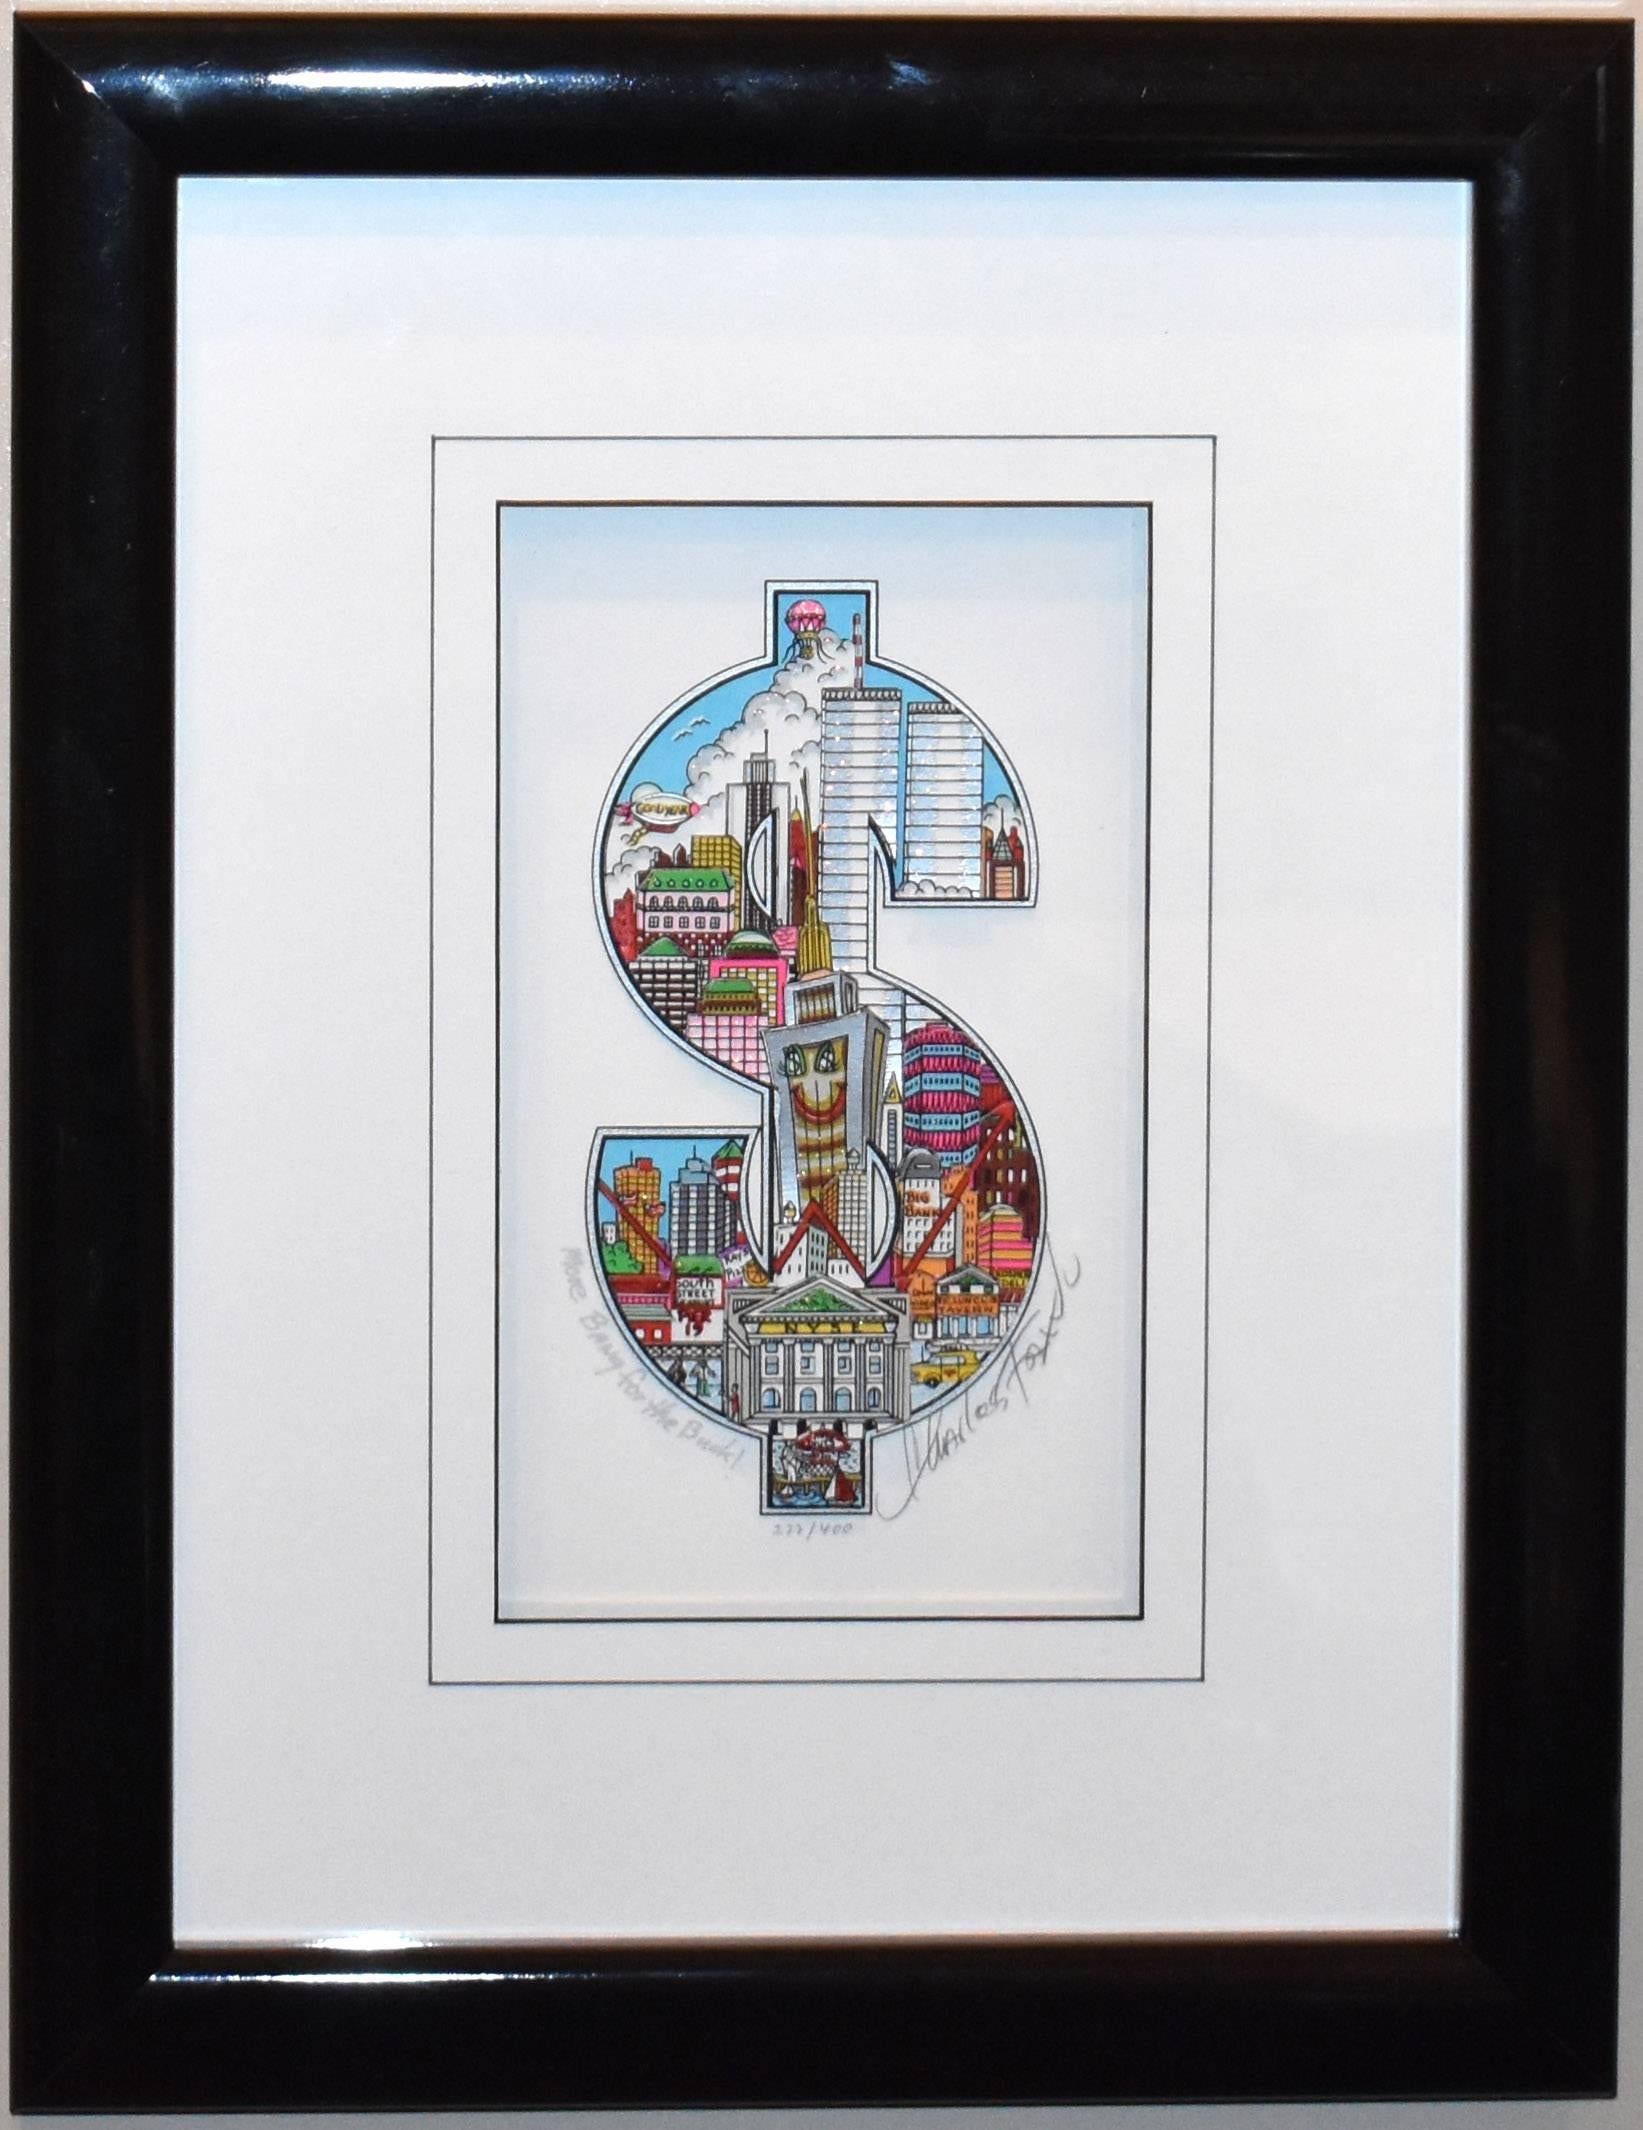 More Bang For the Buck - Print by Charles Fazzino